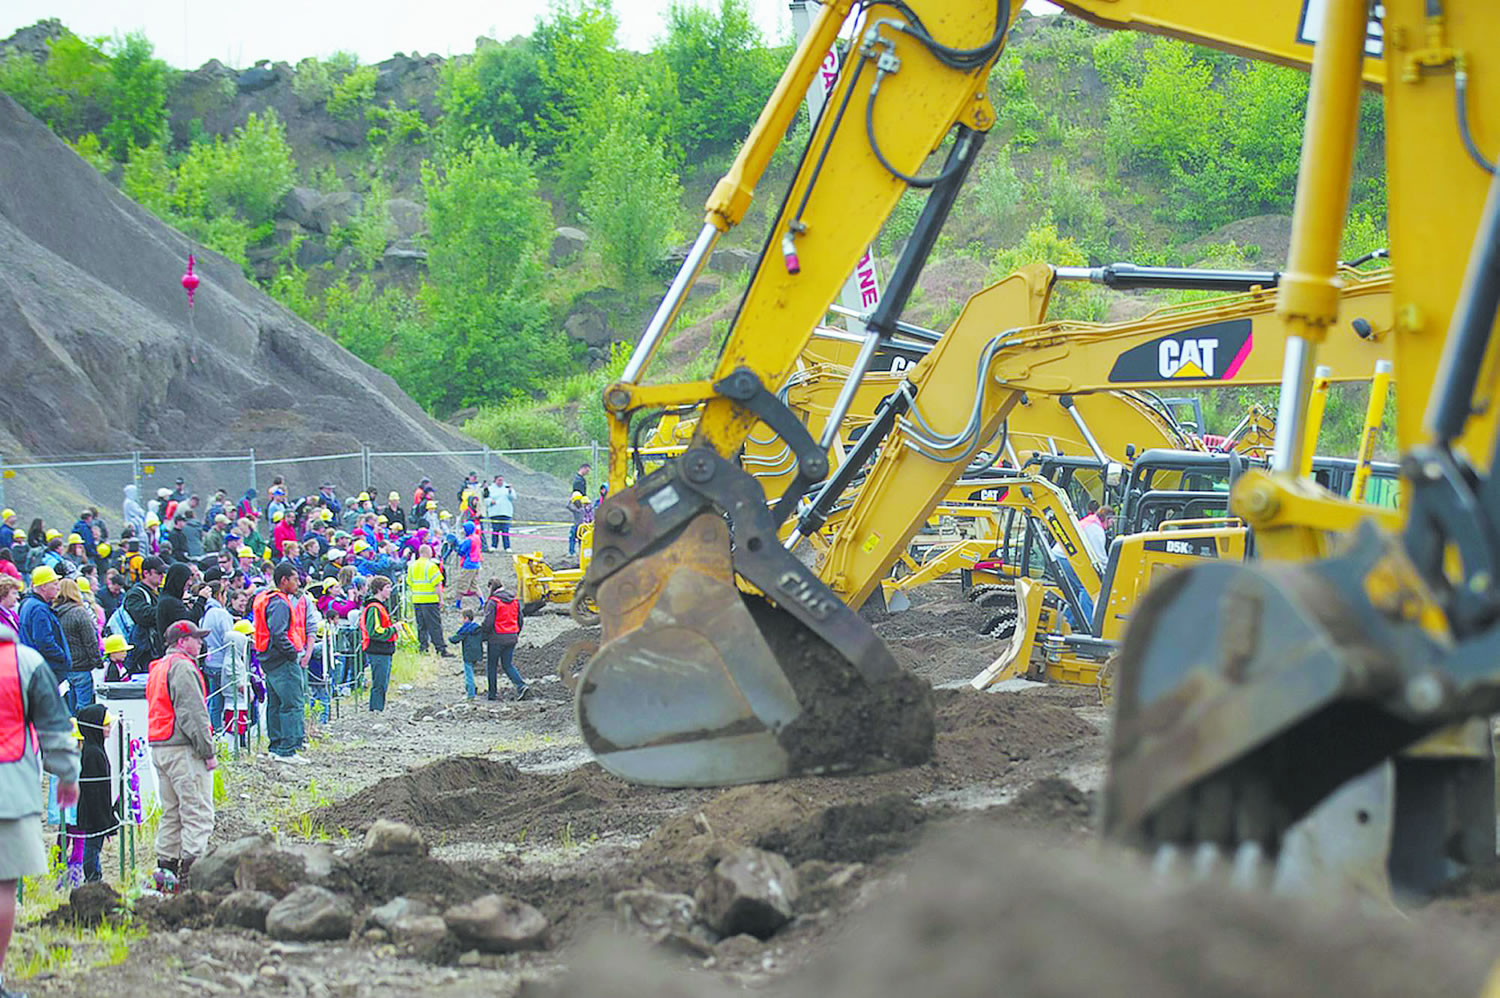 Dozer Day, a fairlike event where kids get to ride and drive heavy construction equipment, play in a pipe tunnel and dig for diamonds, will be held Saturday and Sunday.